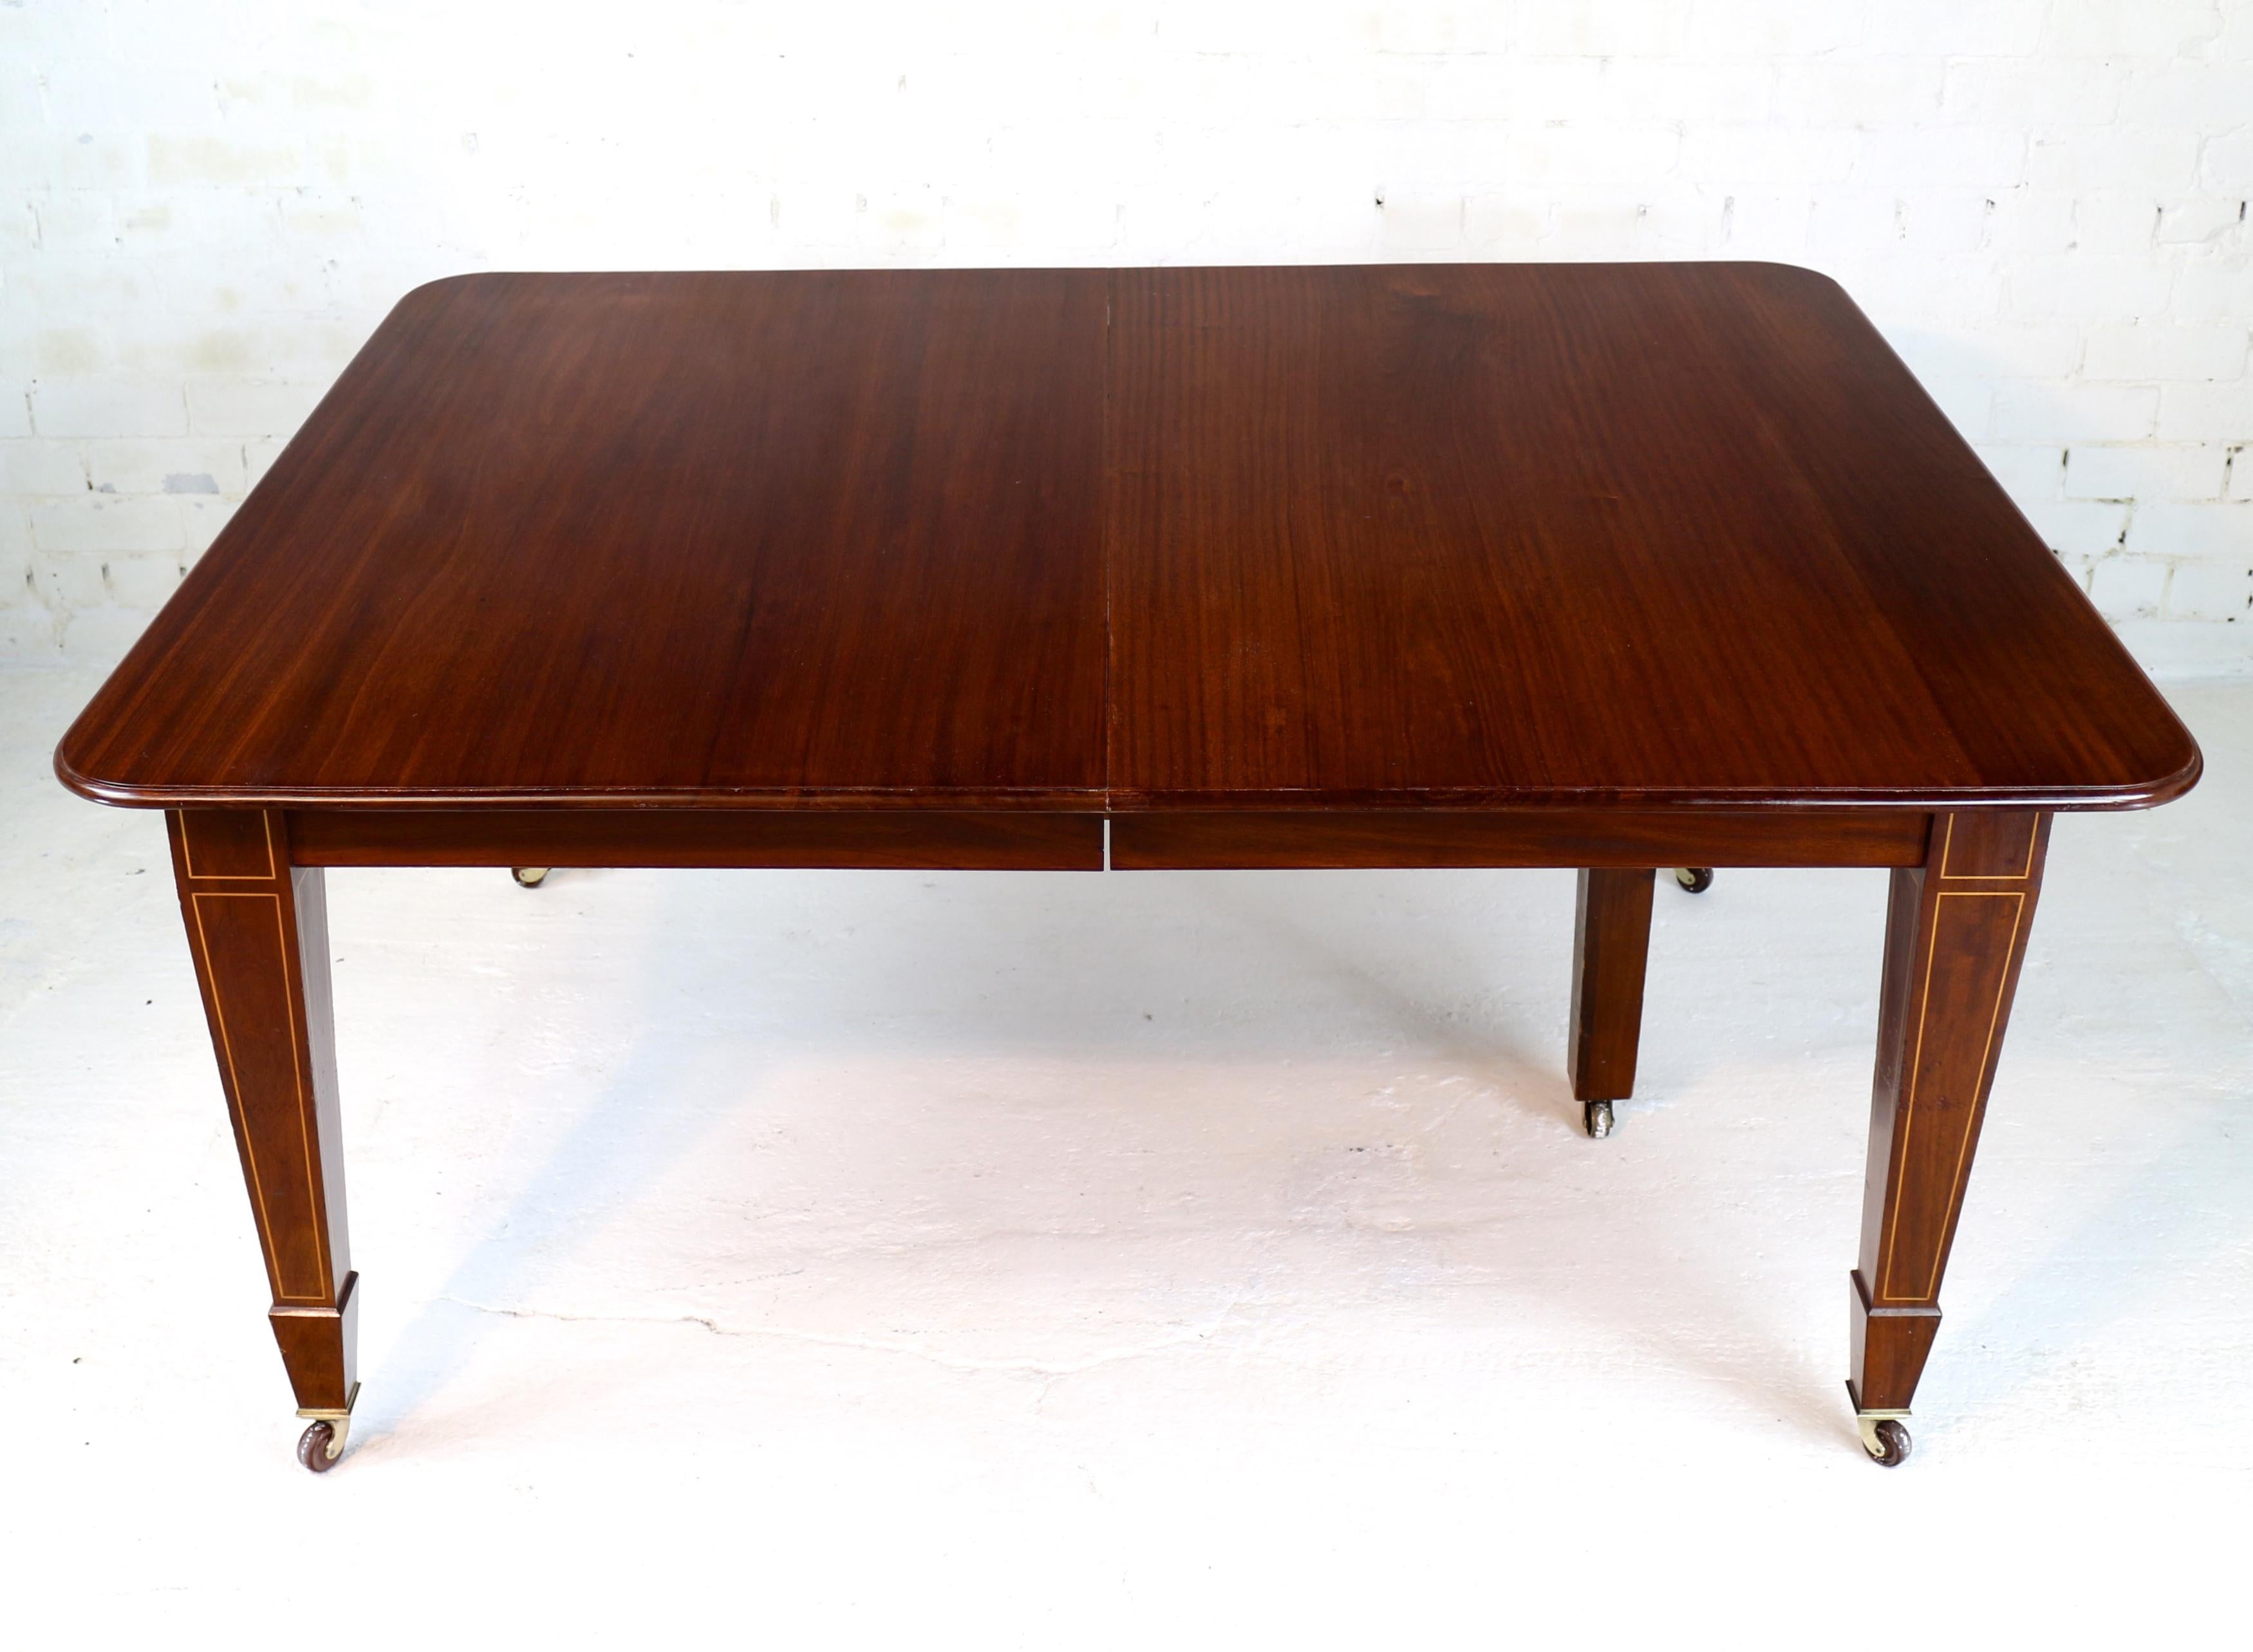 Antique Scottish Mahogany Extending Dining Table with Four Leaves & Leaf Holder 4